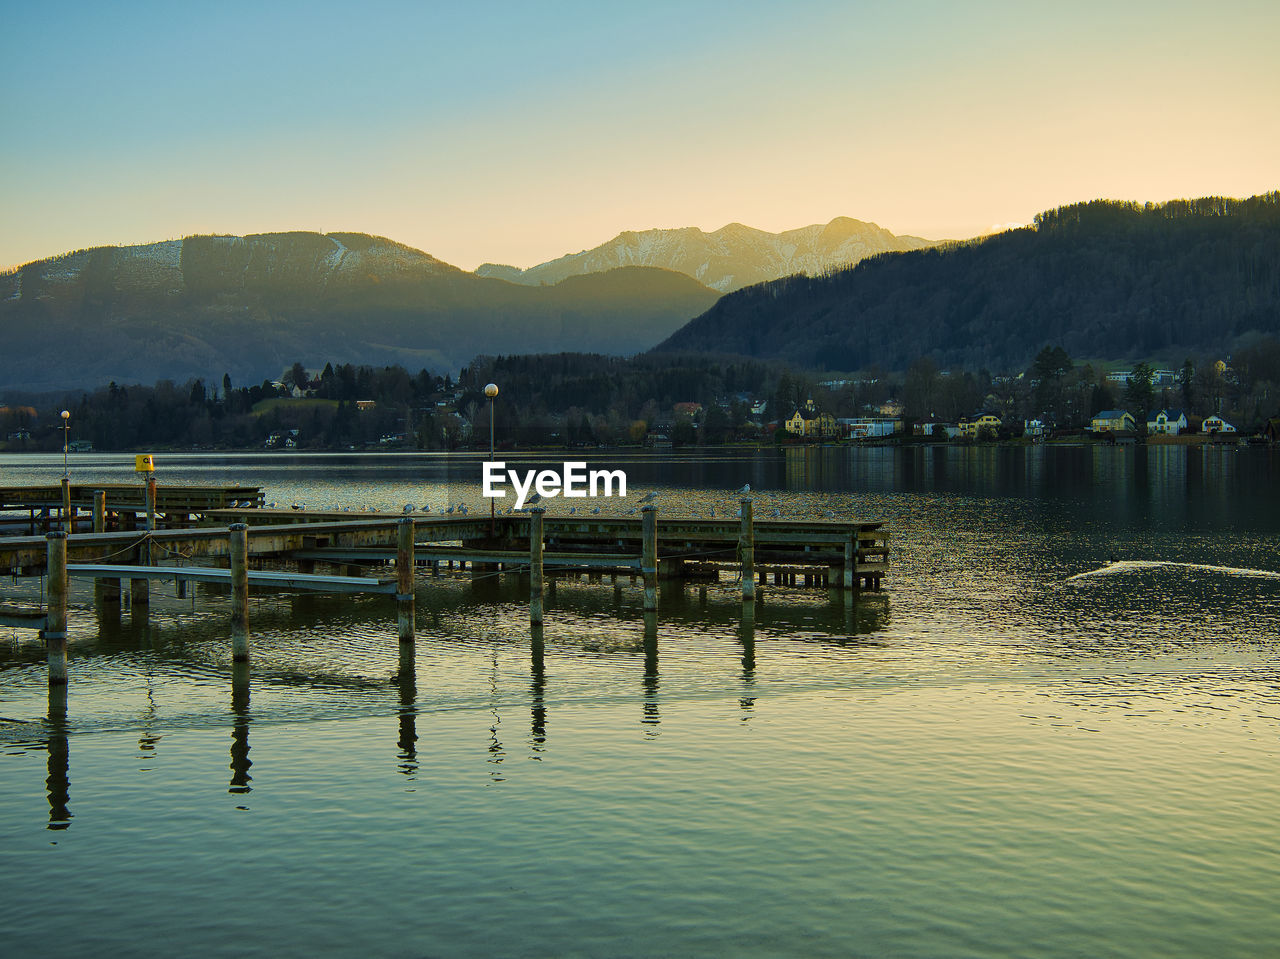 PIER OVER LAKE AGAINST MOUNTAINS DURING SUNSET